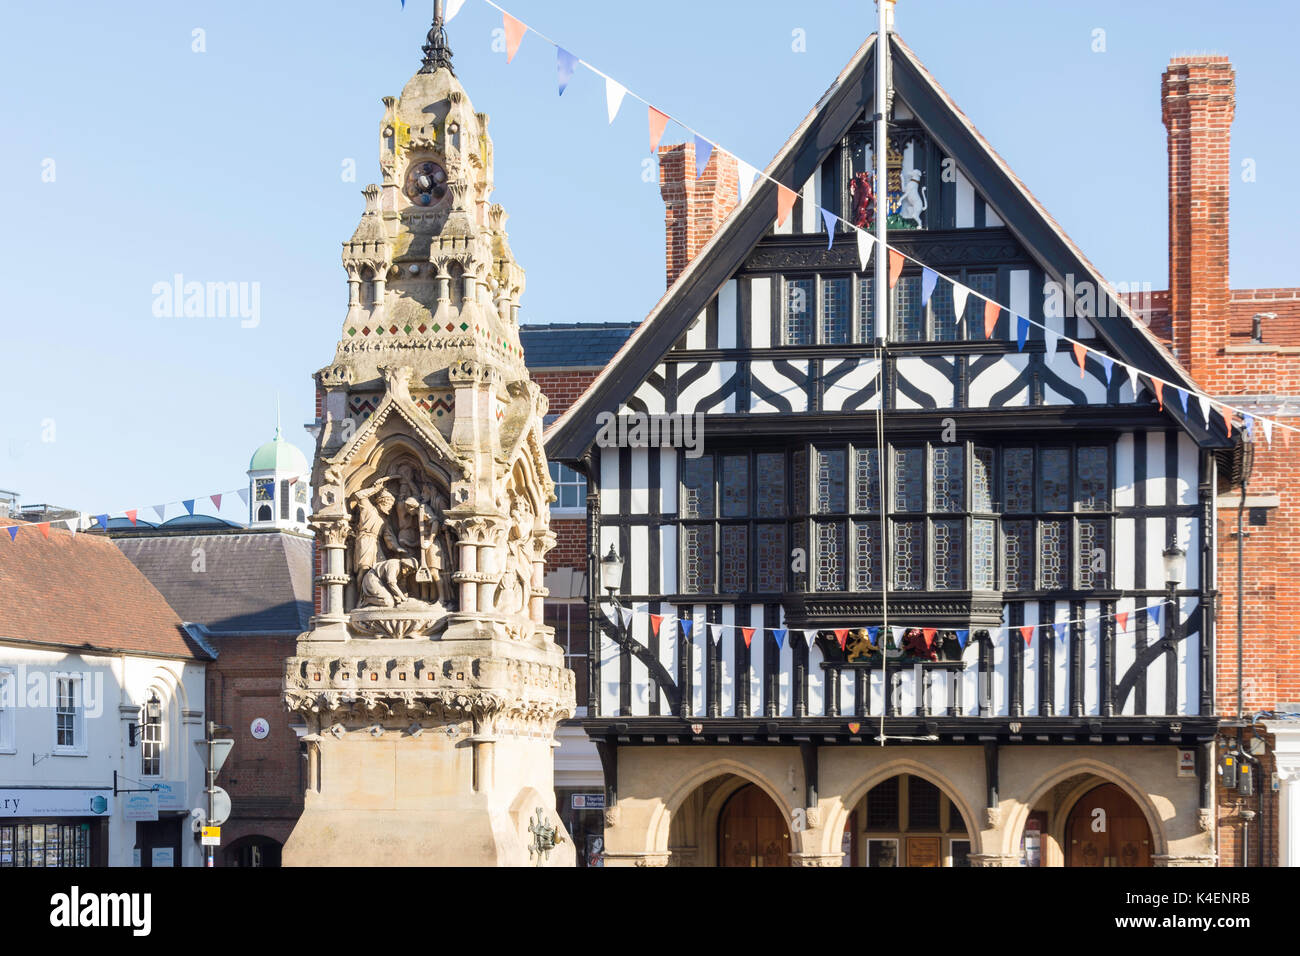 Old Town Hall and Drinking Fountain, Market Place, Saffron Walden, Essex, England, United Kingdom Stock Photo